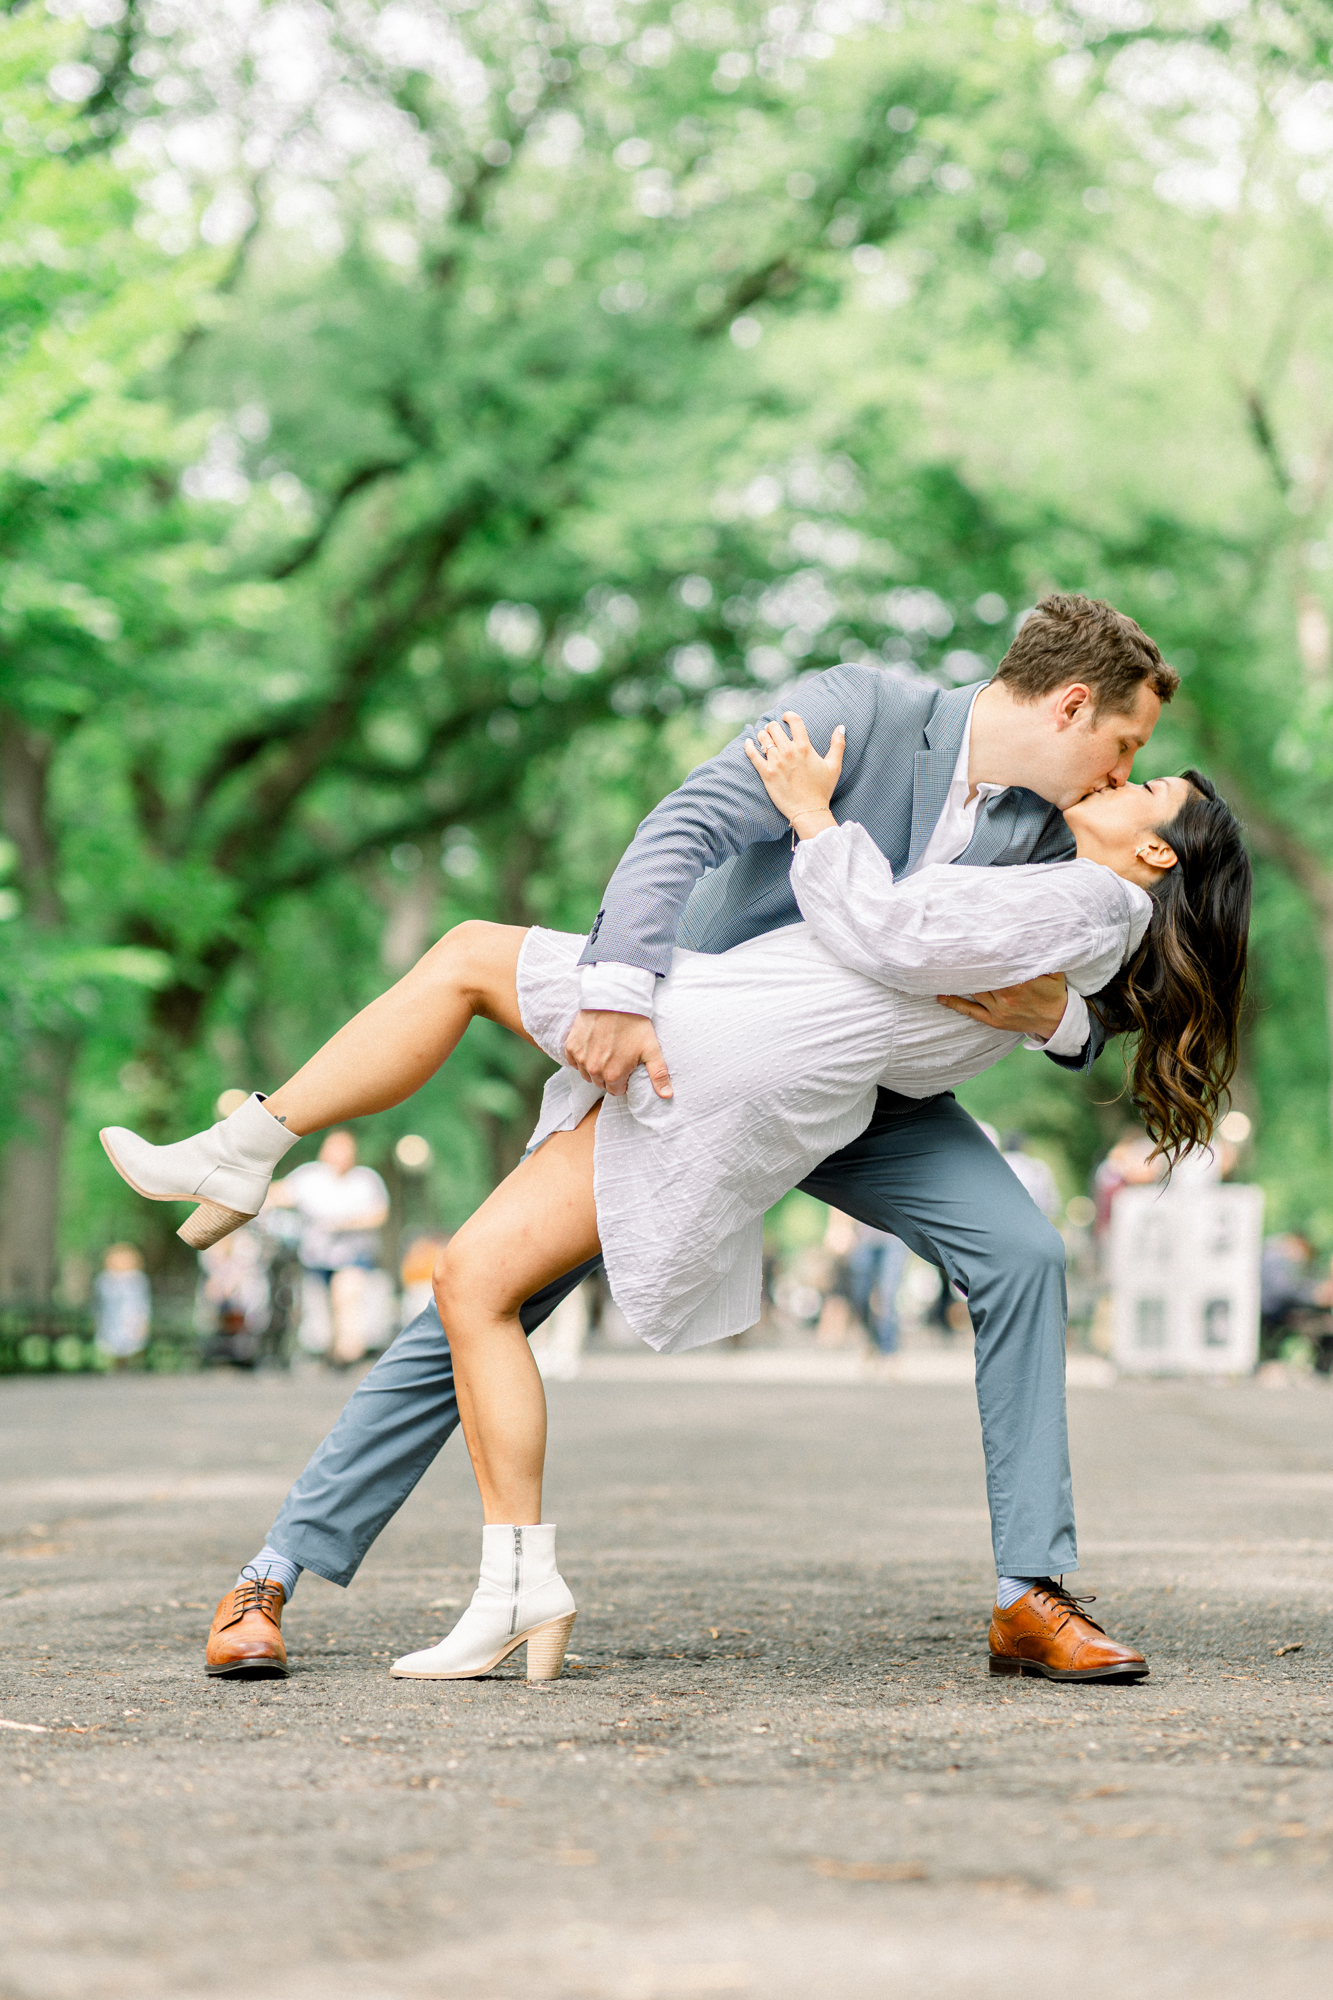 Lively Central Park Rowboat Engagement Photography in New York